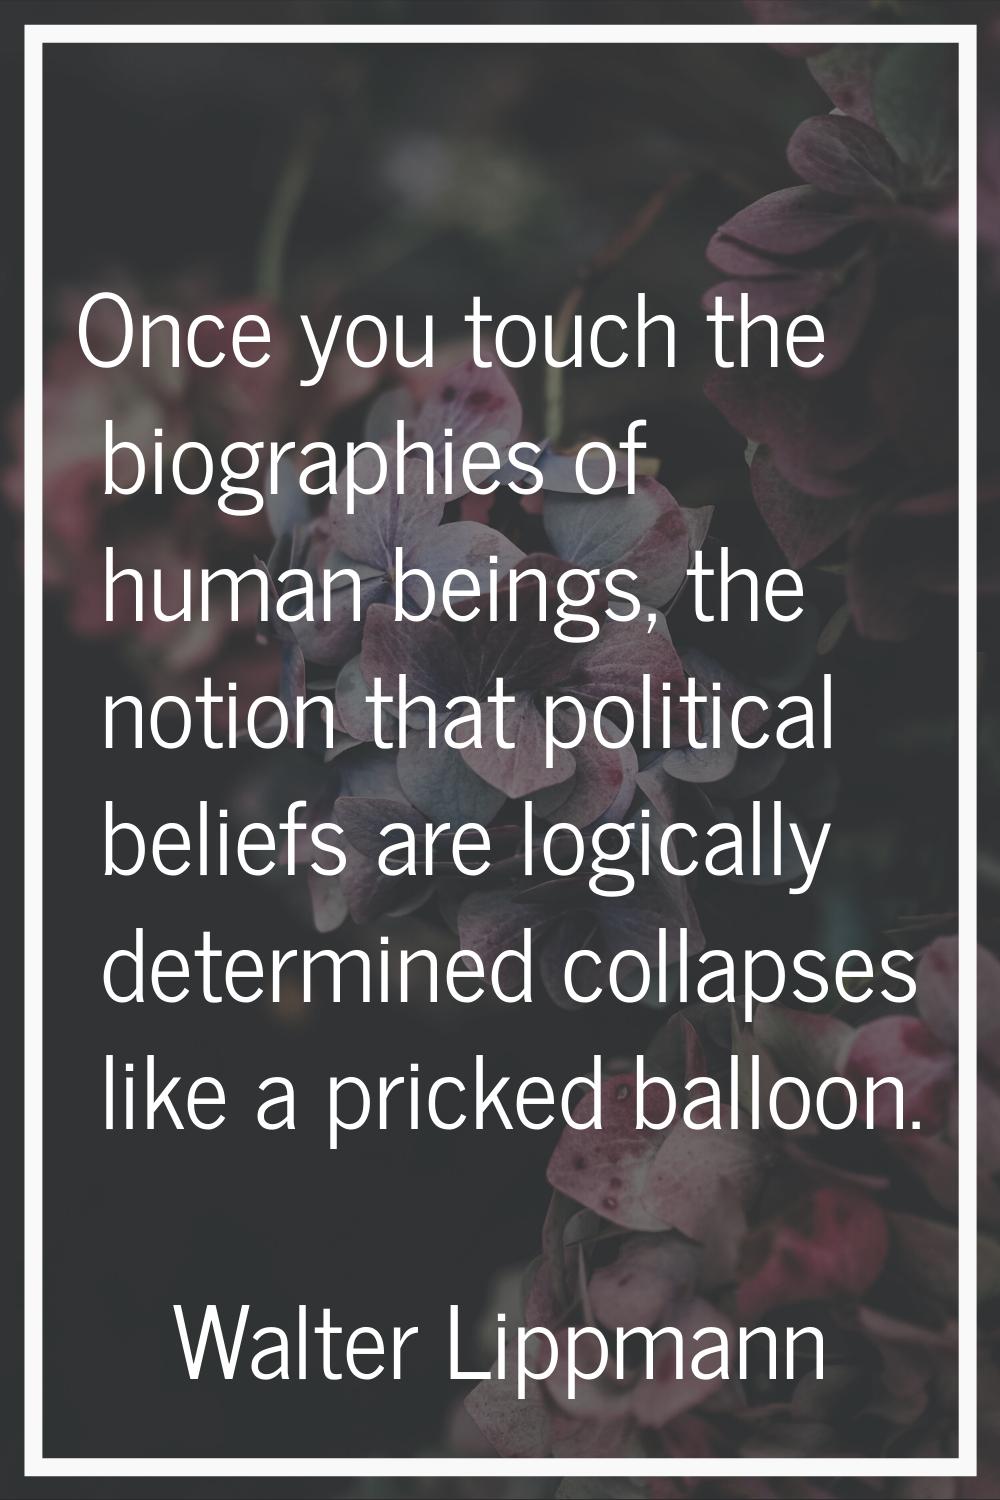 Once you touch the biographies of human beings, the notion that political beliefs are logically det